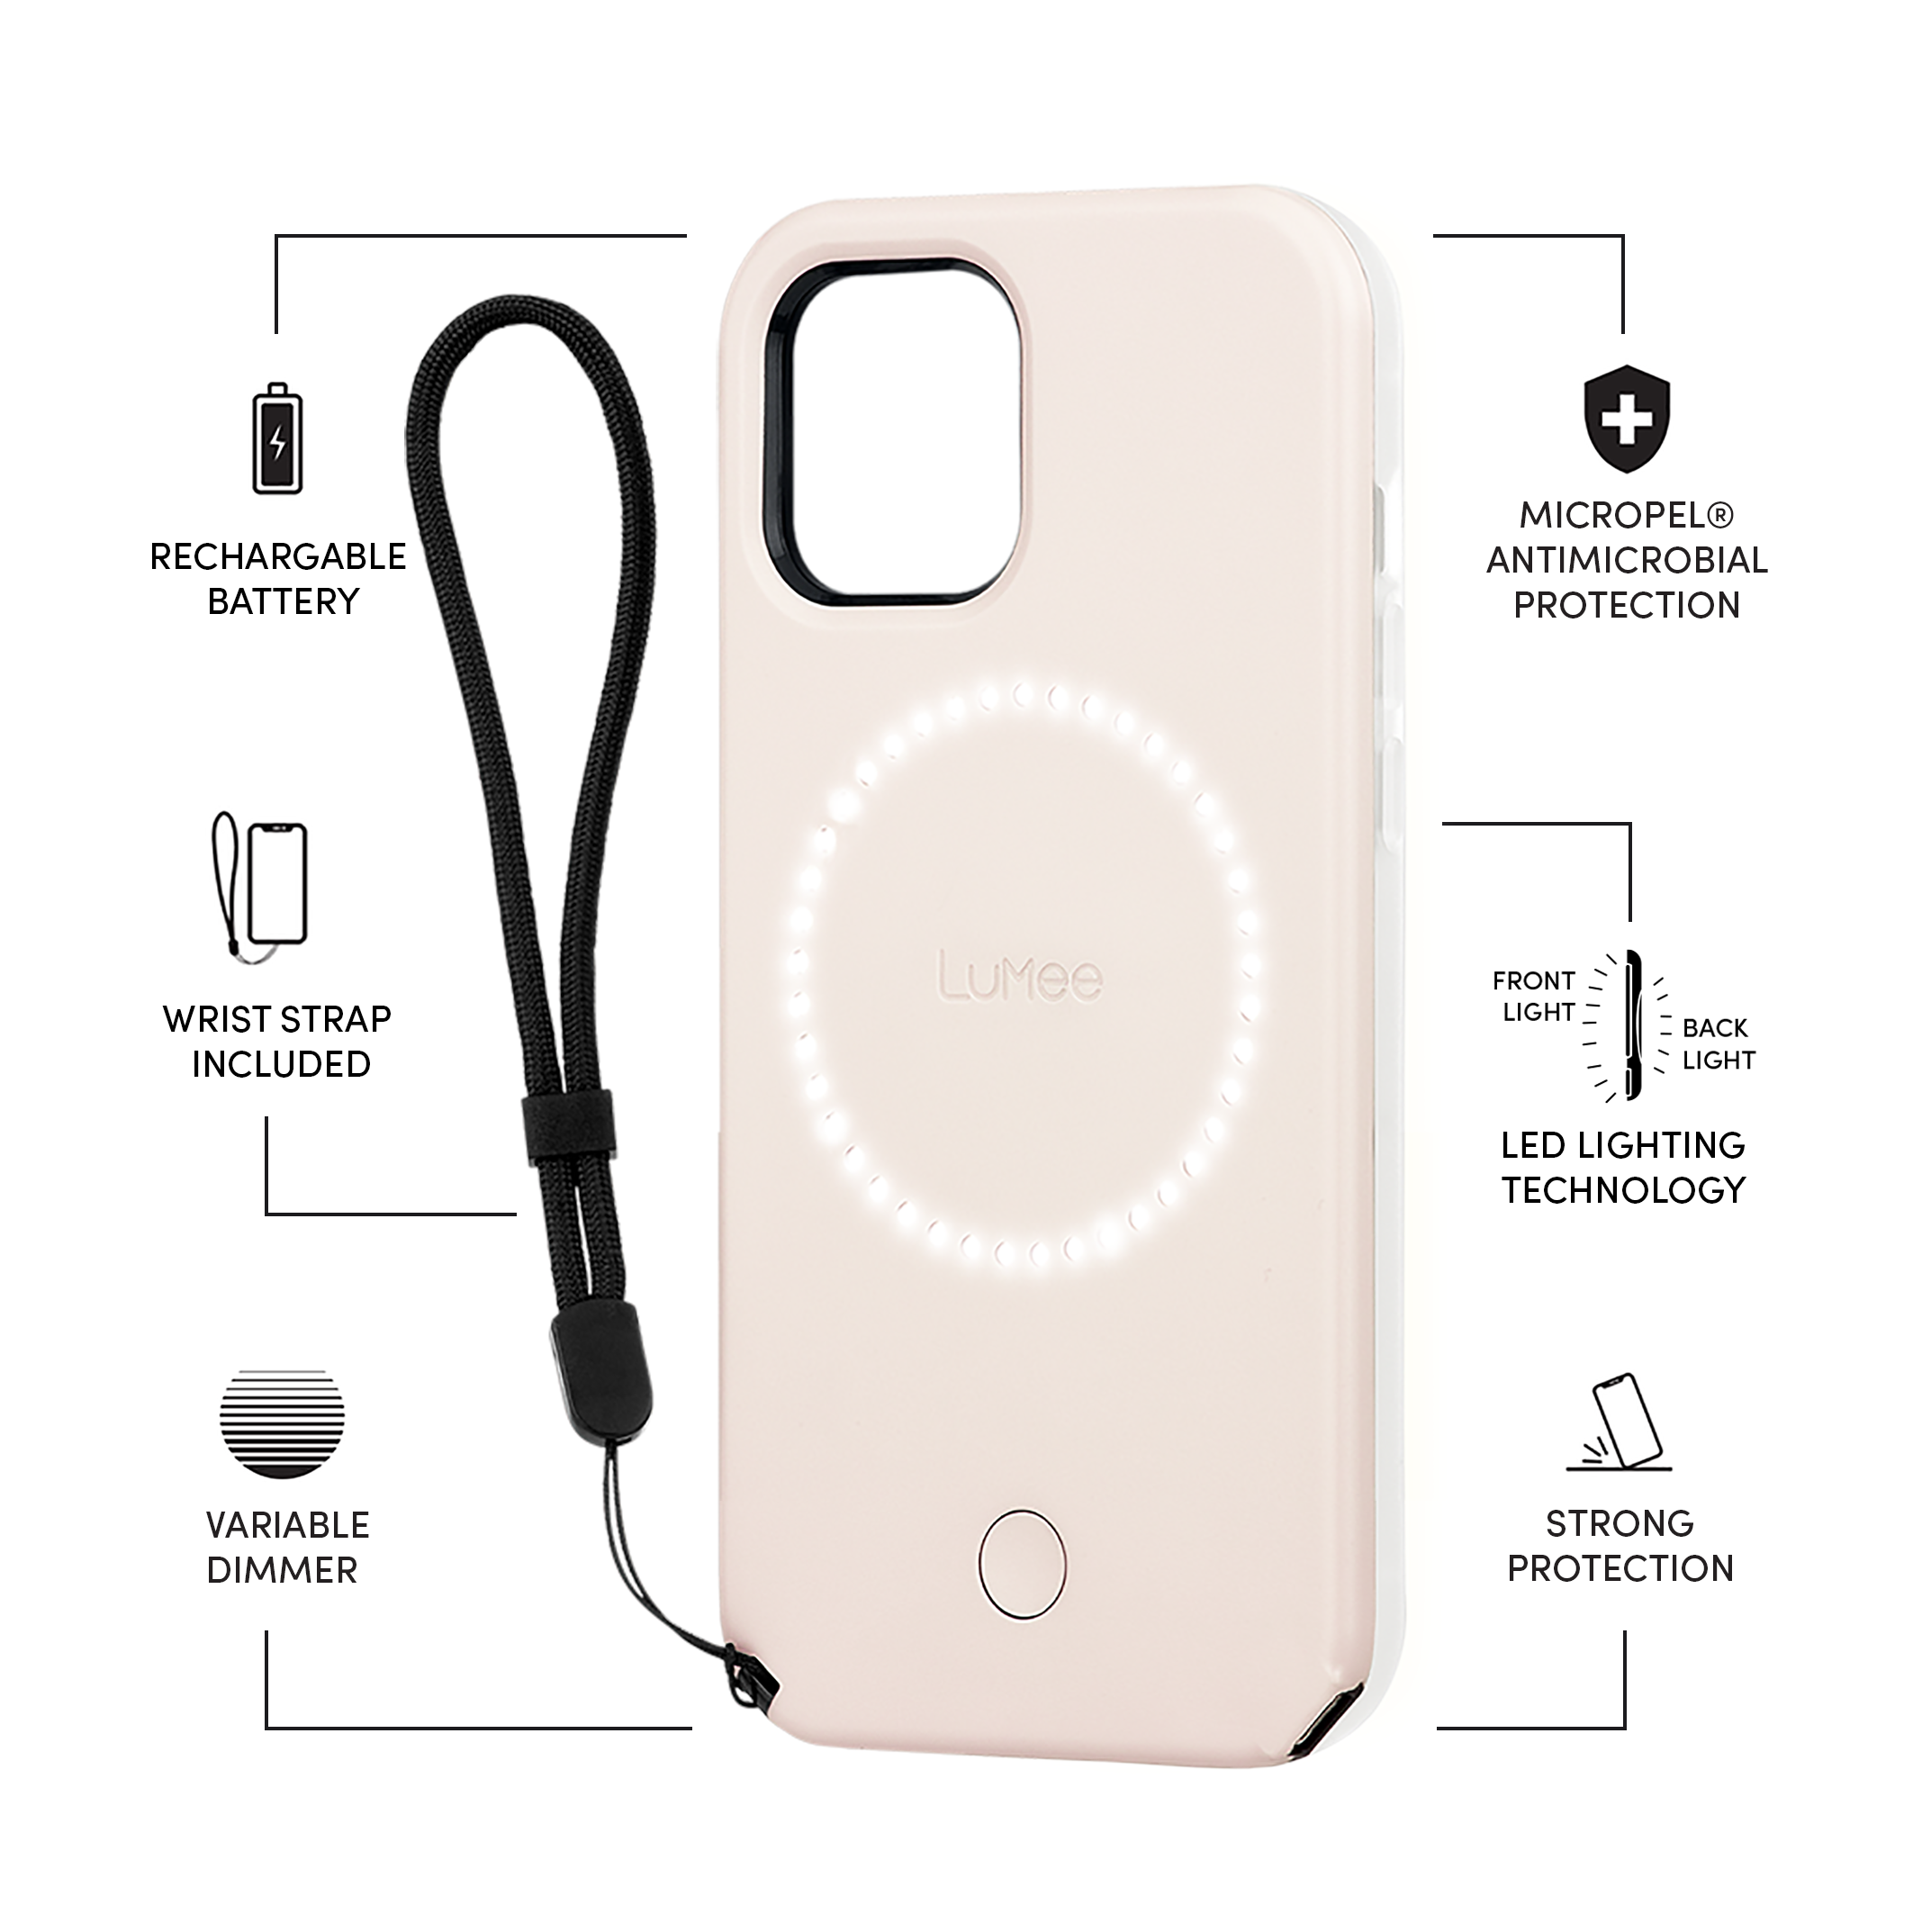 Lumee Halo Selfie Case for Apple iPhone 12 / 12 Pro - Studio-Like Front & Back Light w/ Variable Dimmer & Micropel AntiBacterial Protection Wireless Pass-Through Charging - Millenial Pink